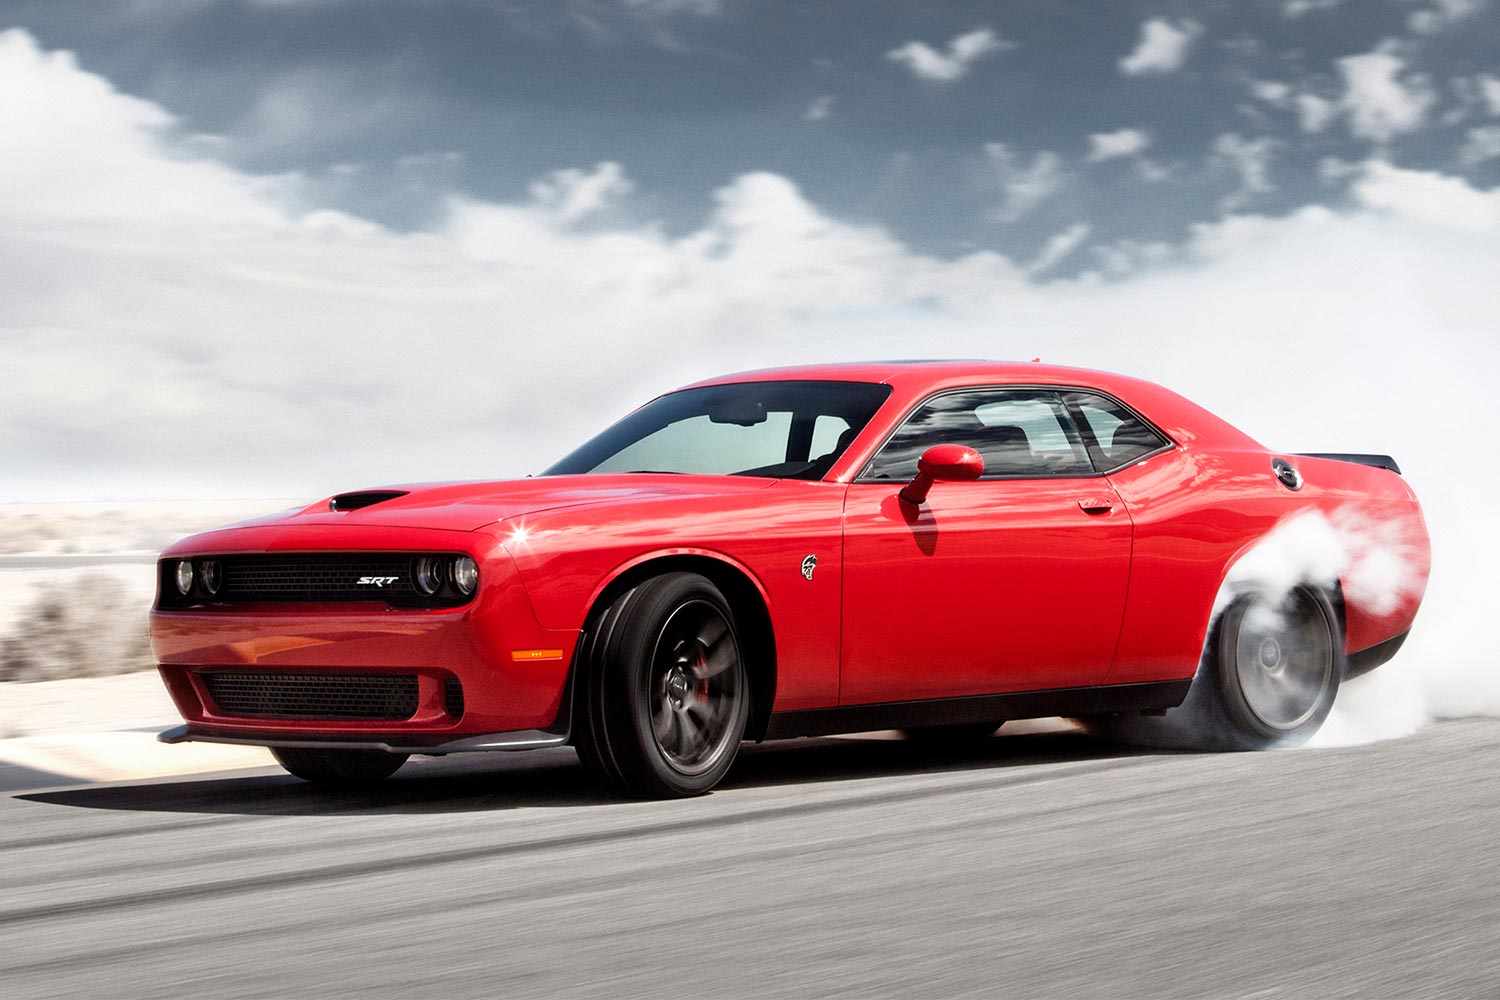 2015 Dodge Challenger SRT Hellcat, the first appearance of the Hellcat V8 engine